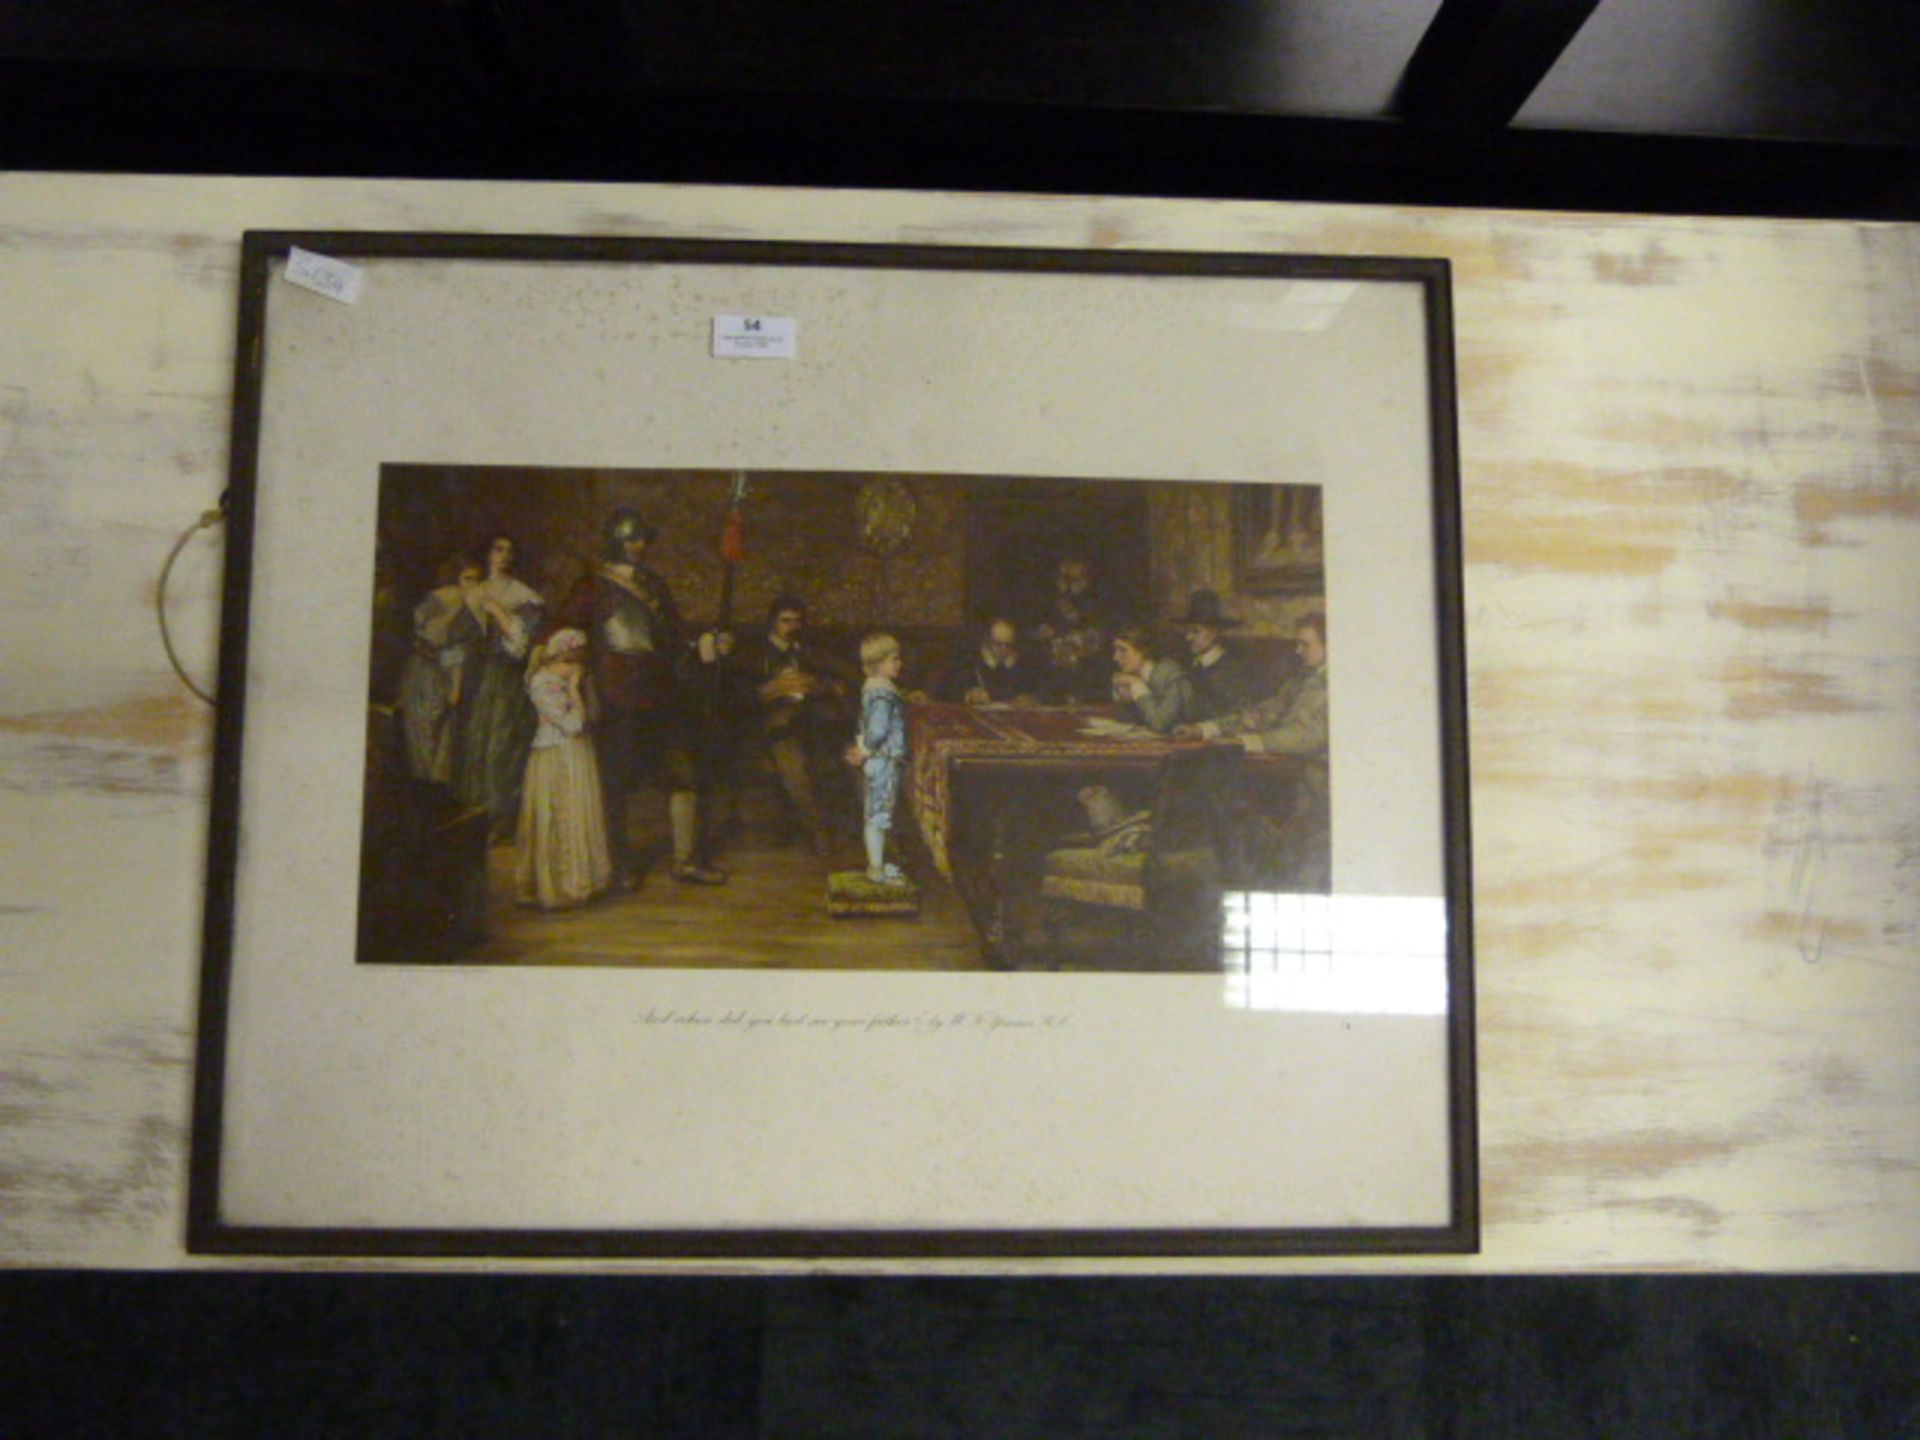 Oak Framed Historical Print "And when did you last